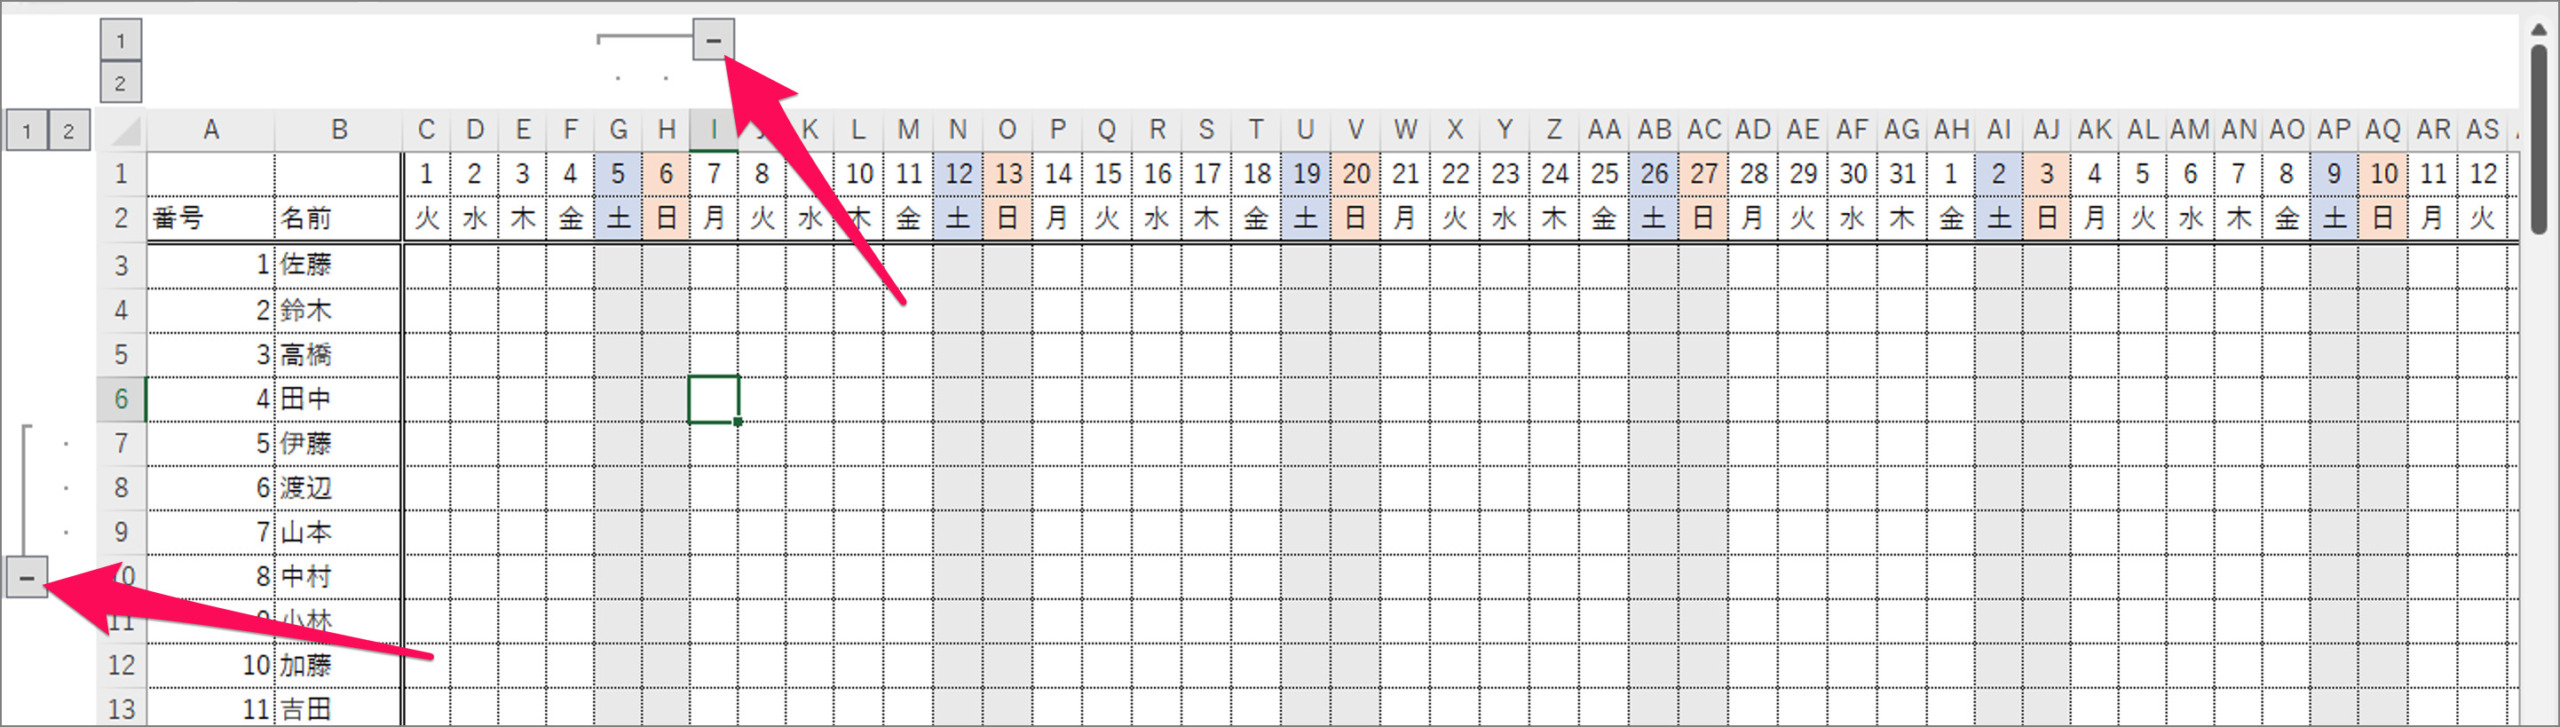 grouping excel rows columns a10 scaled